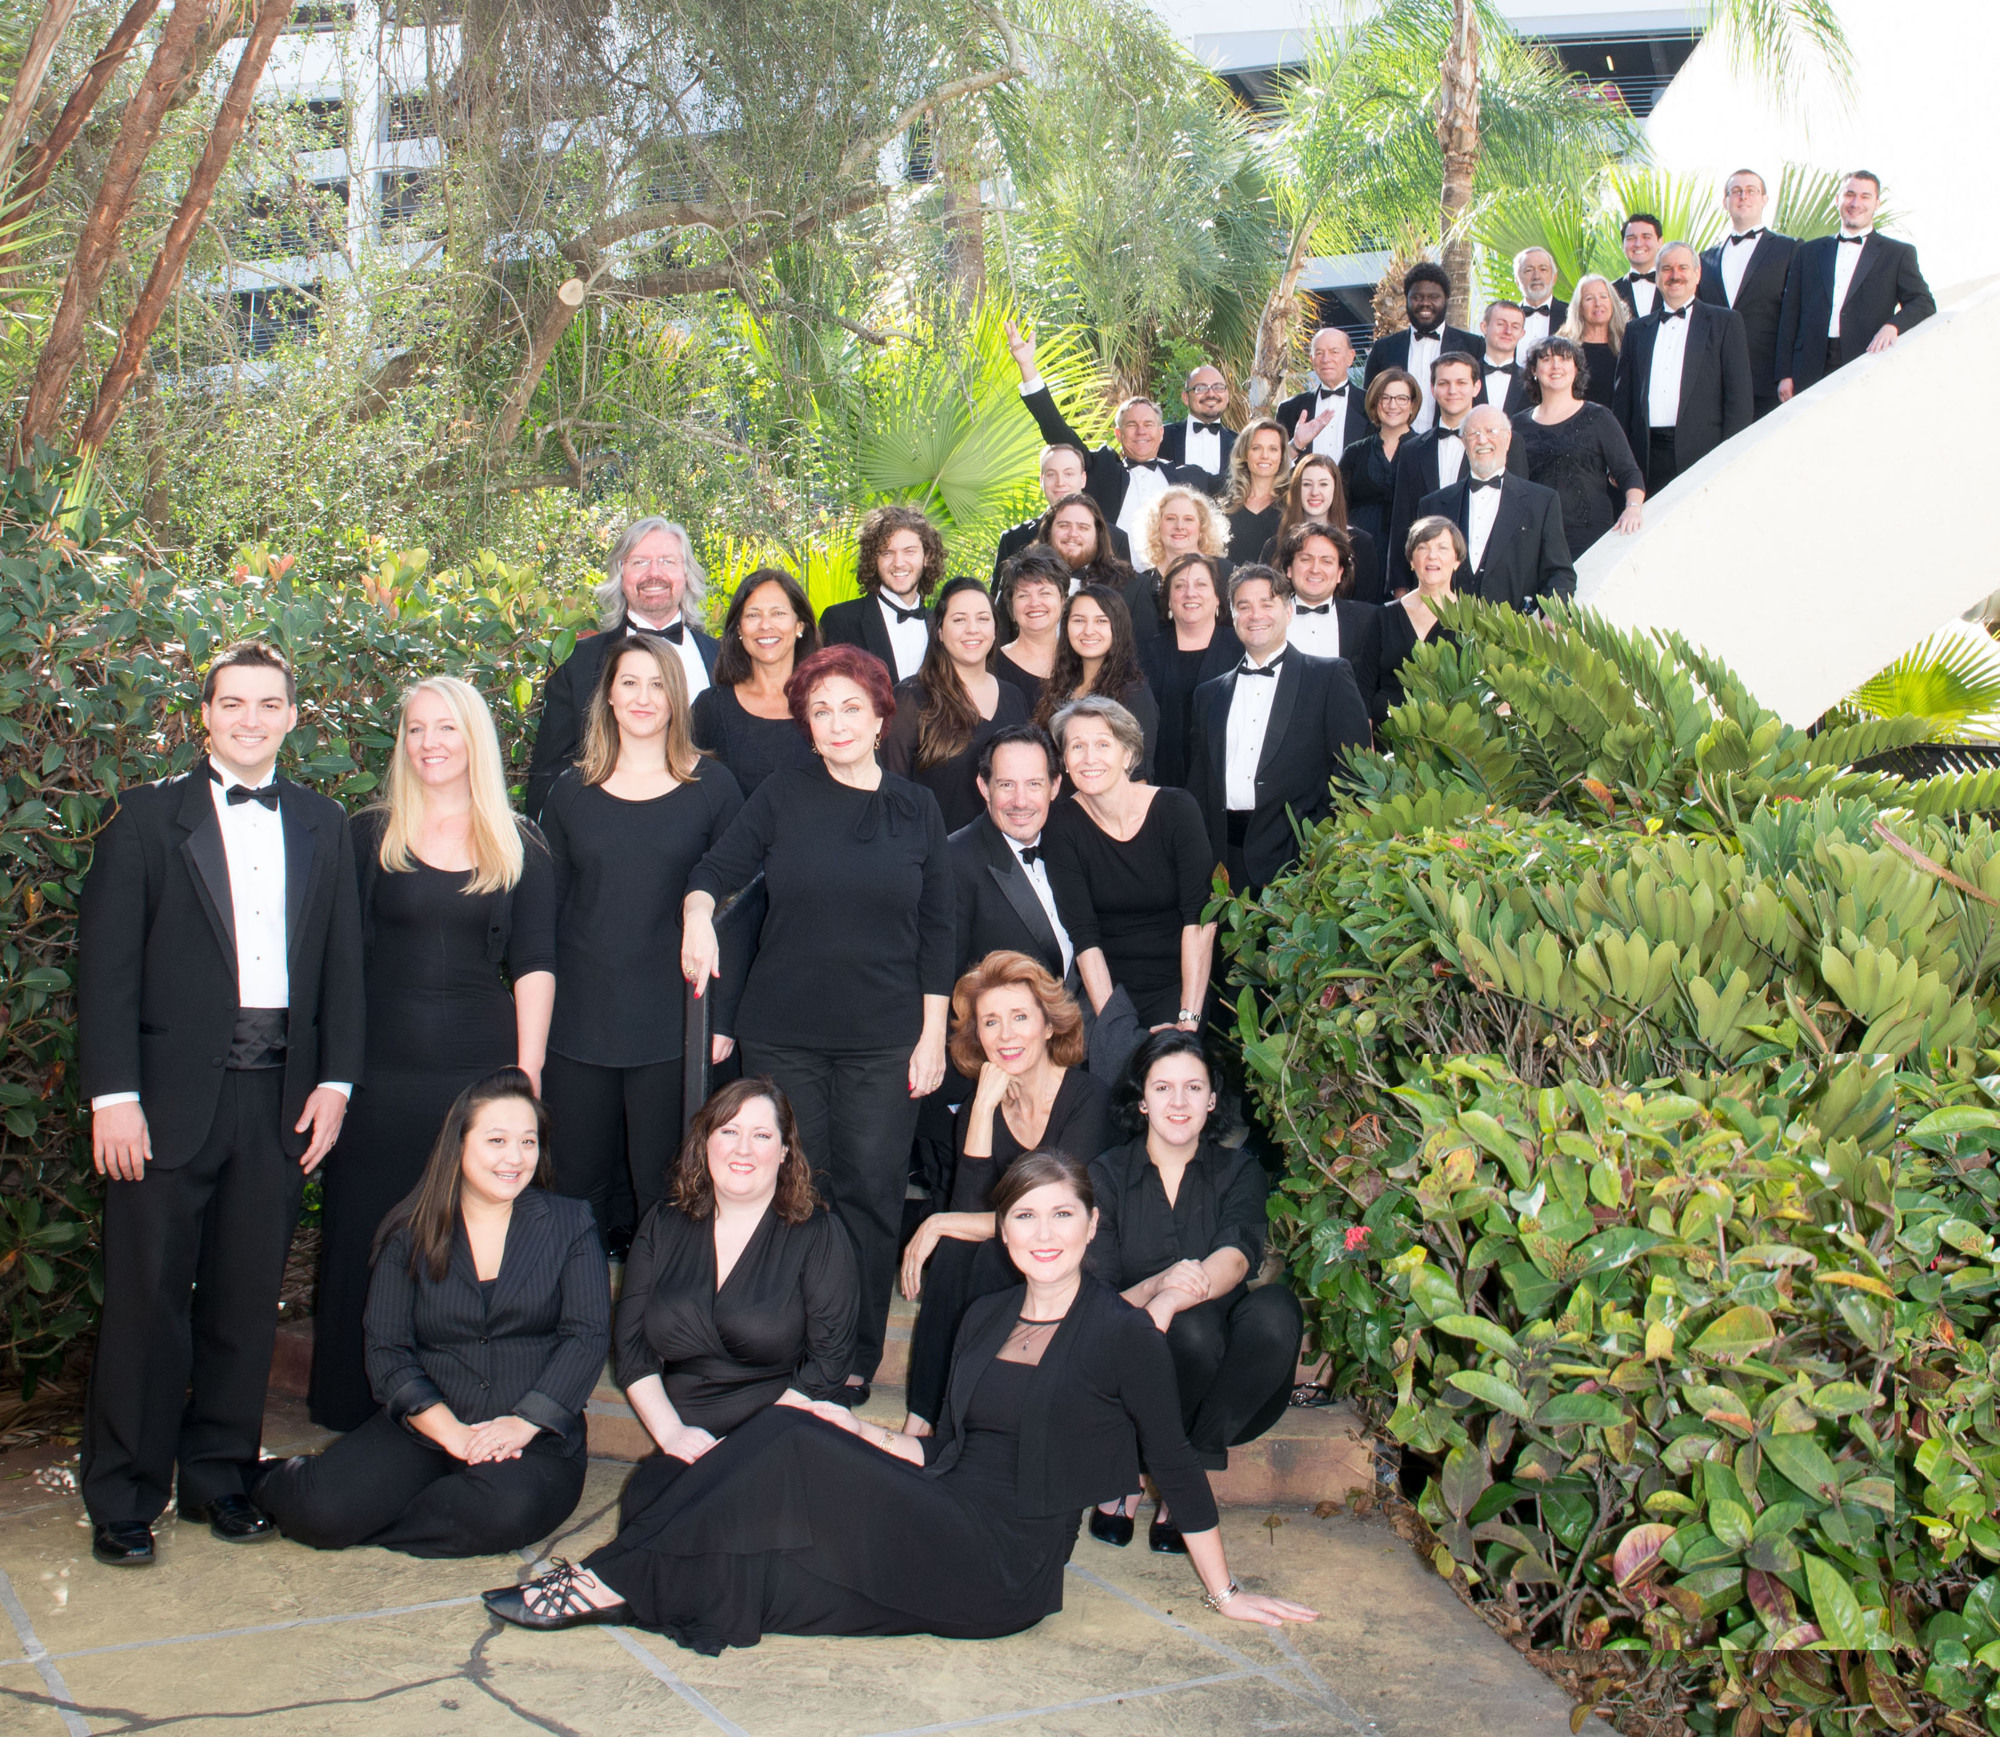 Choral Artists of Sarasota will perform everything from patriotic classics such as “America, the Beautiful” to a unique pairing of “My Country Tis of Thee” with “Lift Every Voice and Sing,” Courtesy photo